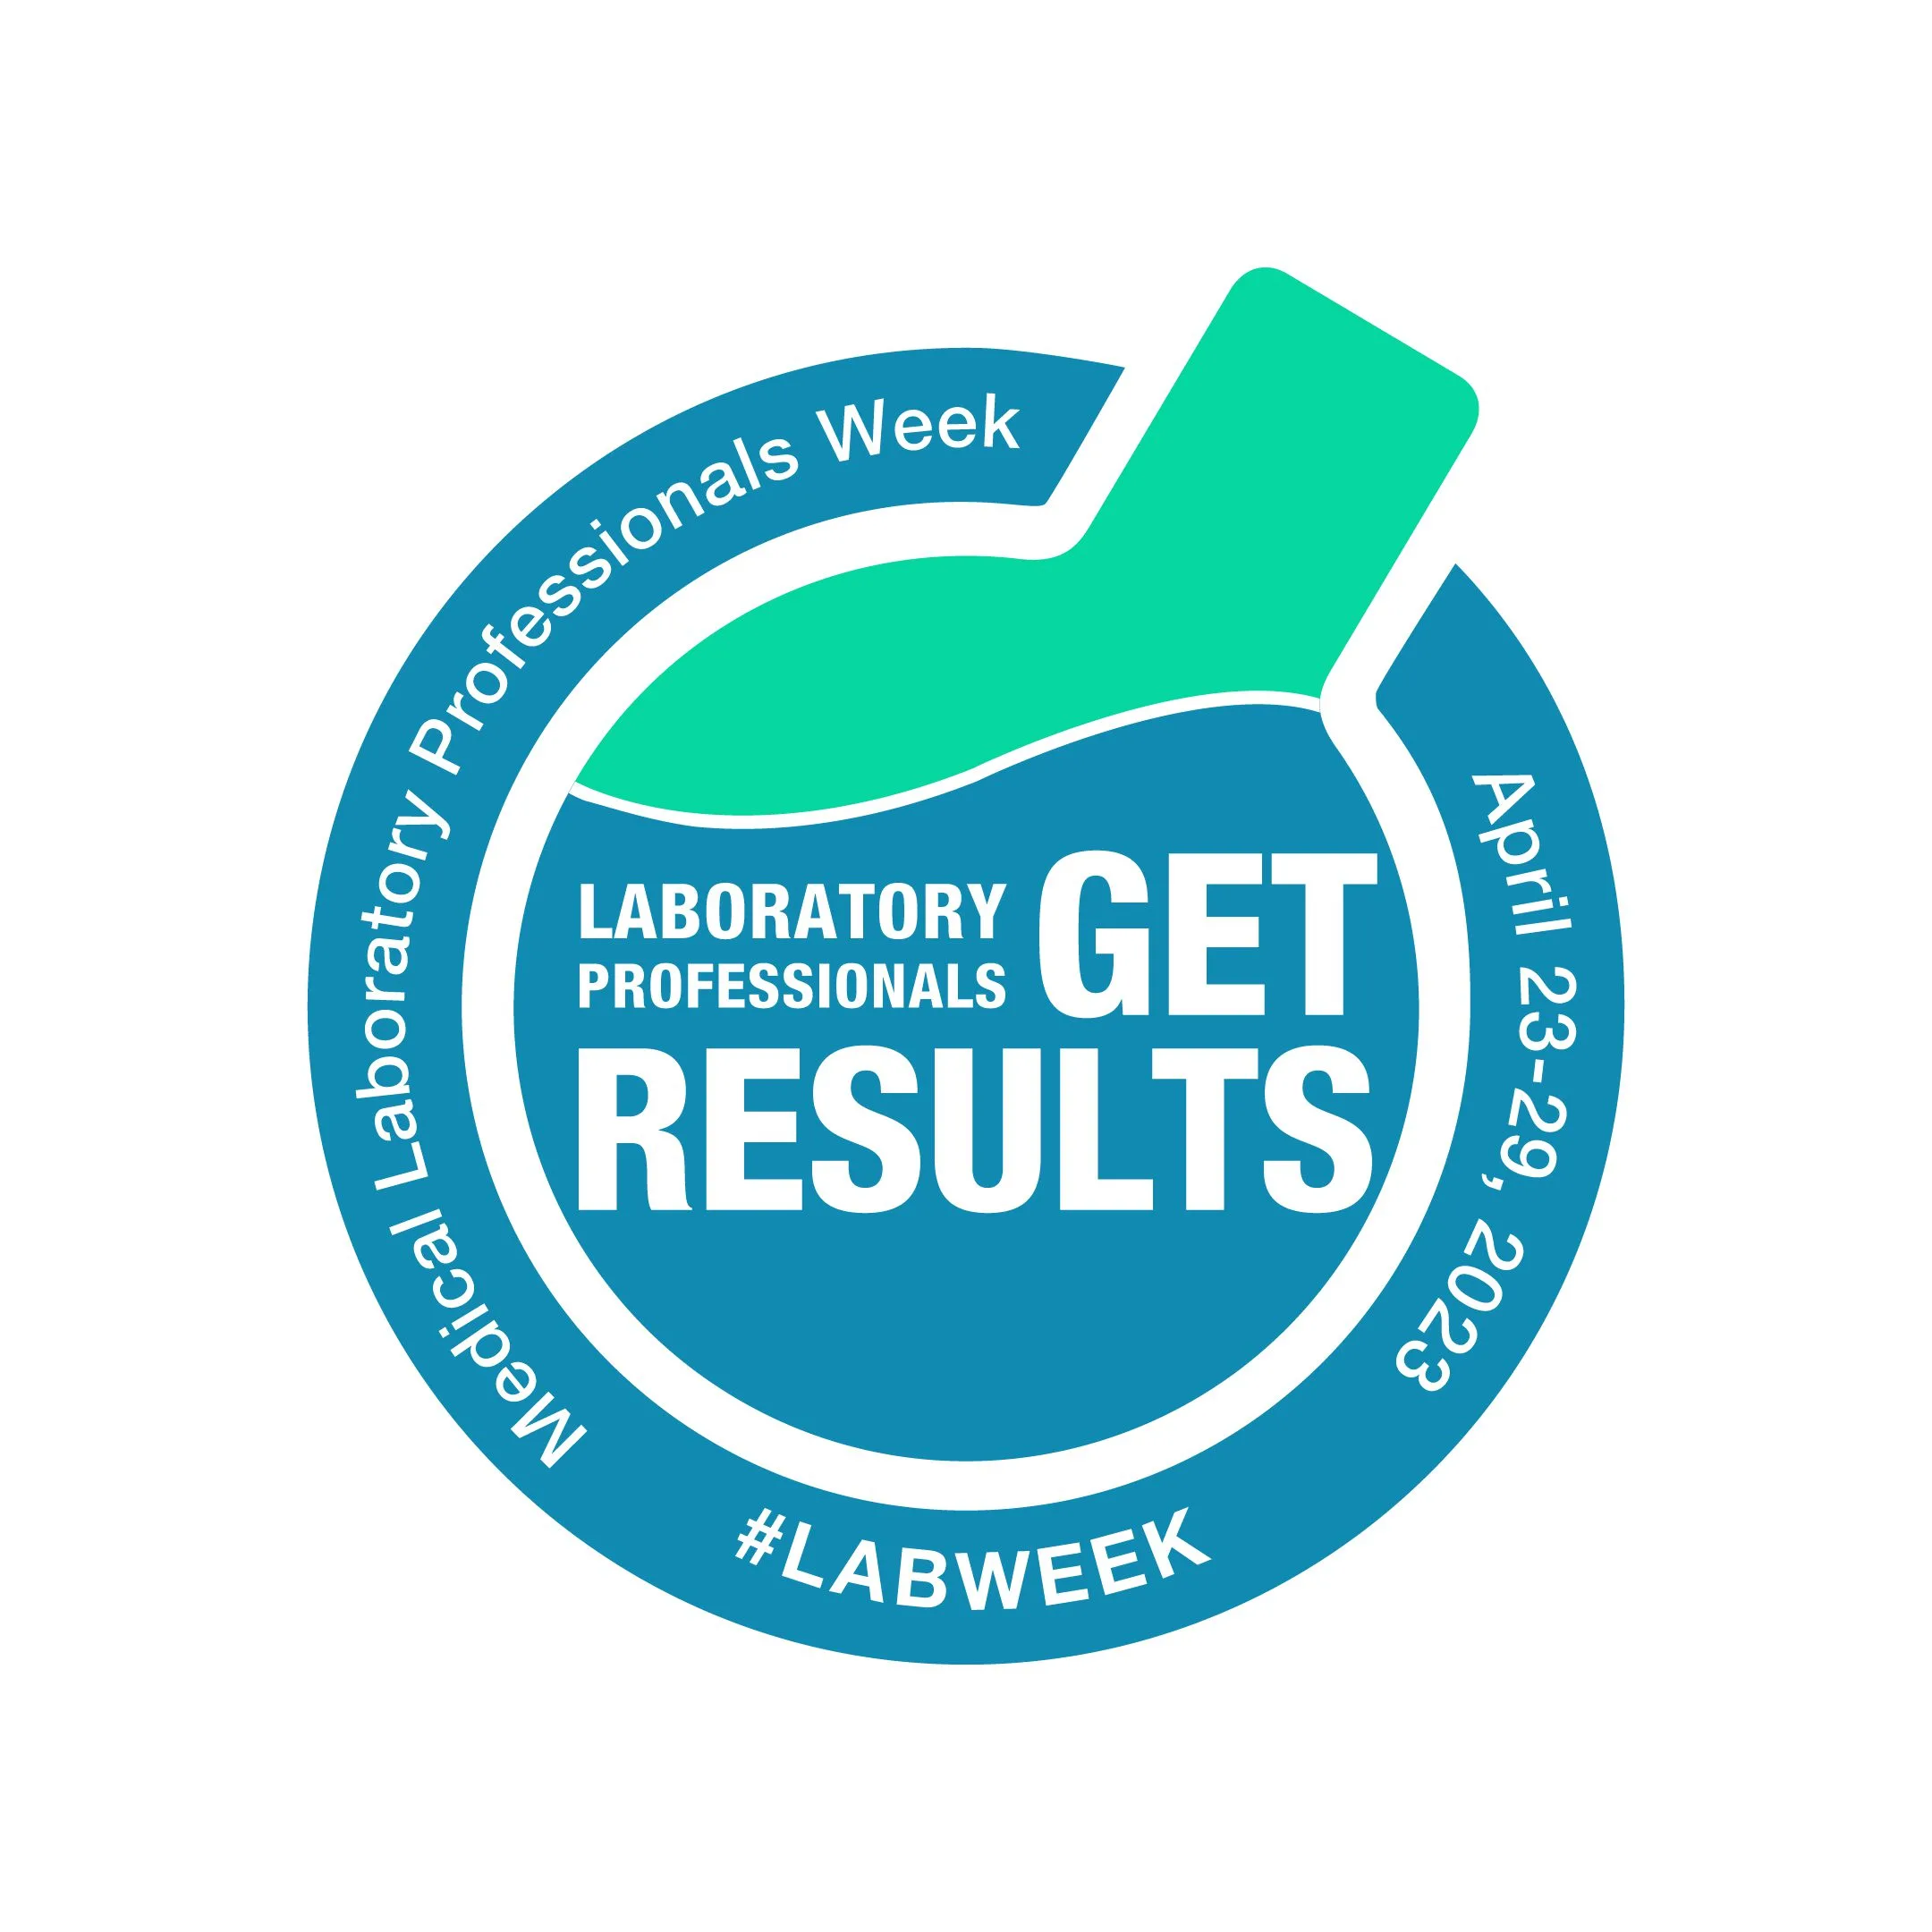 How Are You Celebrating Medical Laboratory Professionals Week This Year?